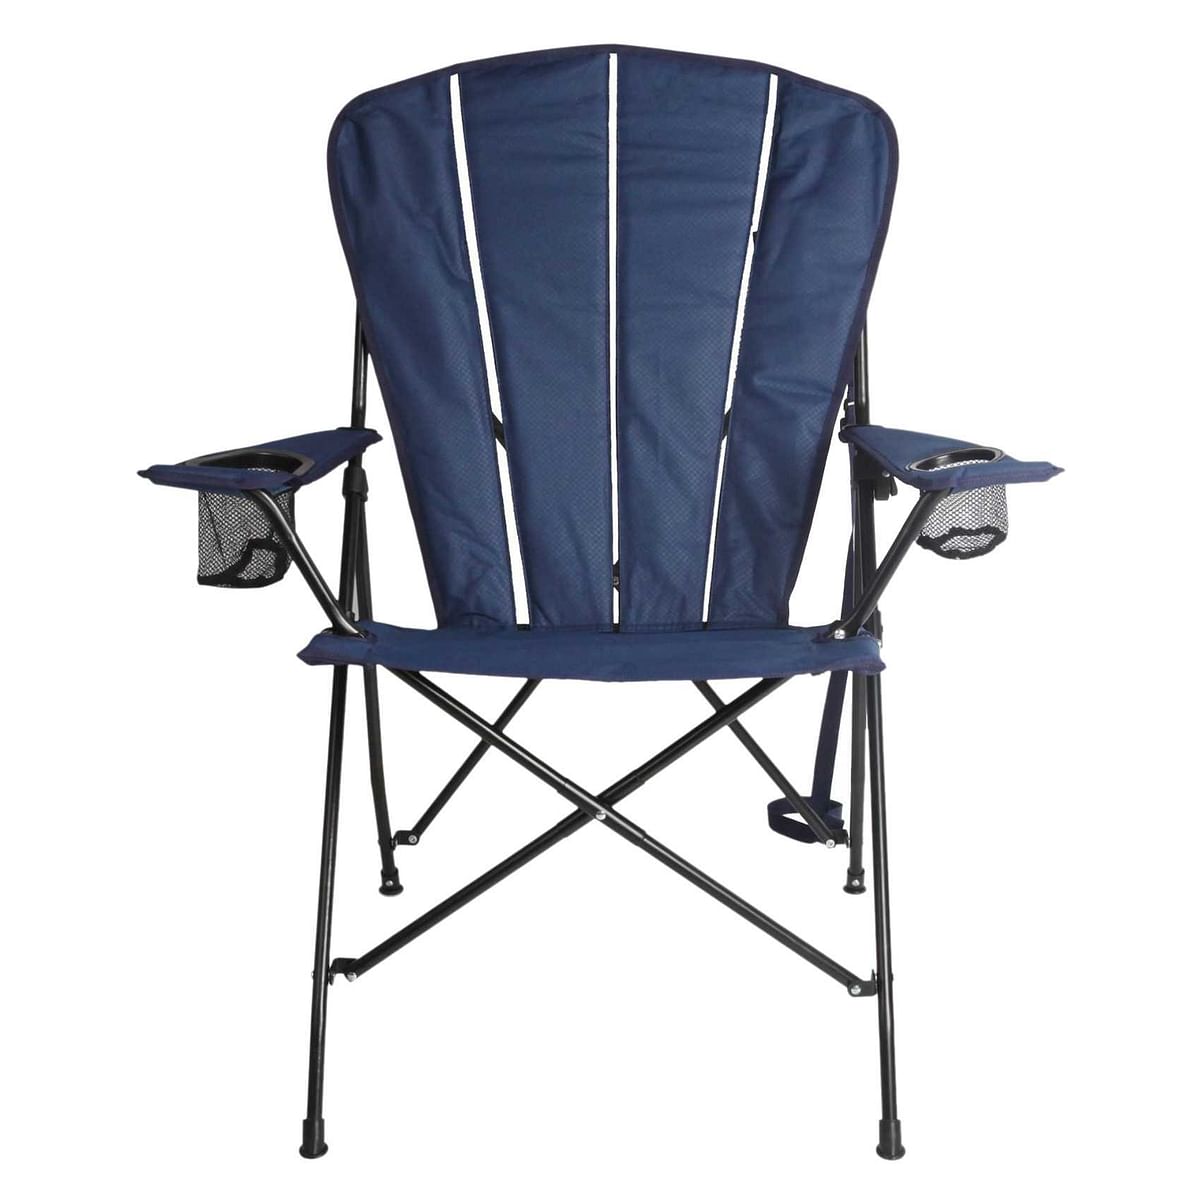 Ozark Trail Deluxe Camping Adirondack Style Chair Model No. FC323A - Navy Blue